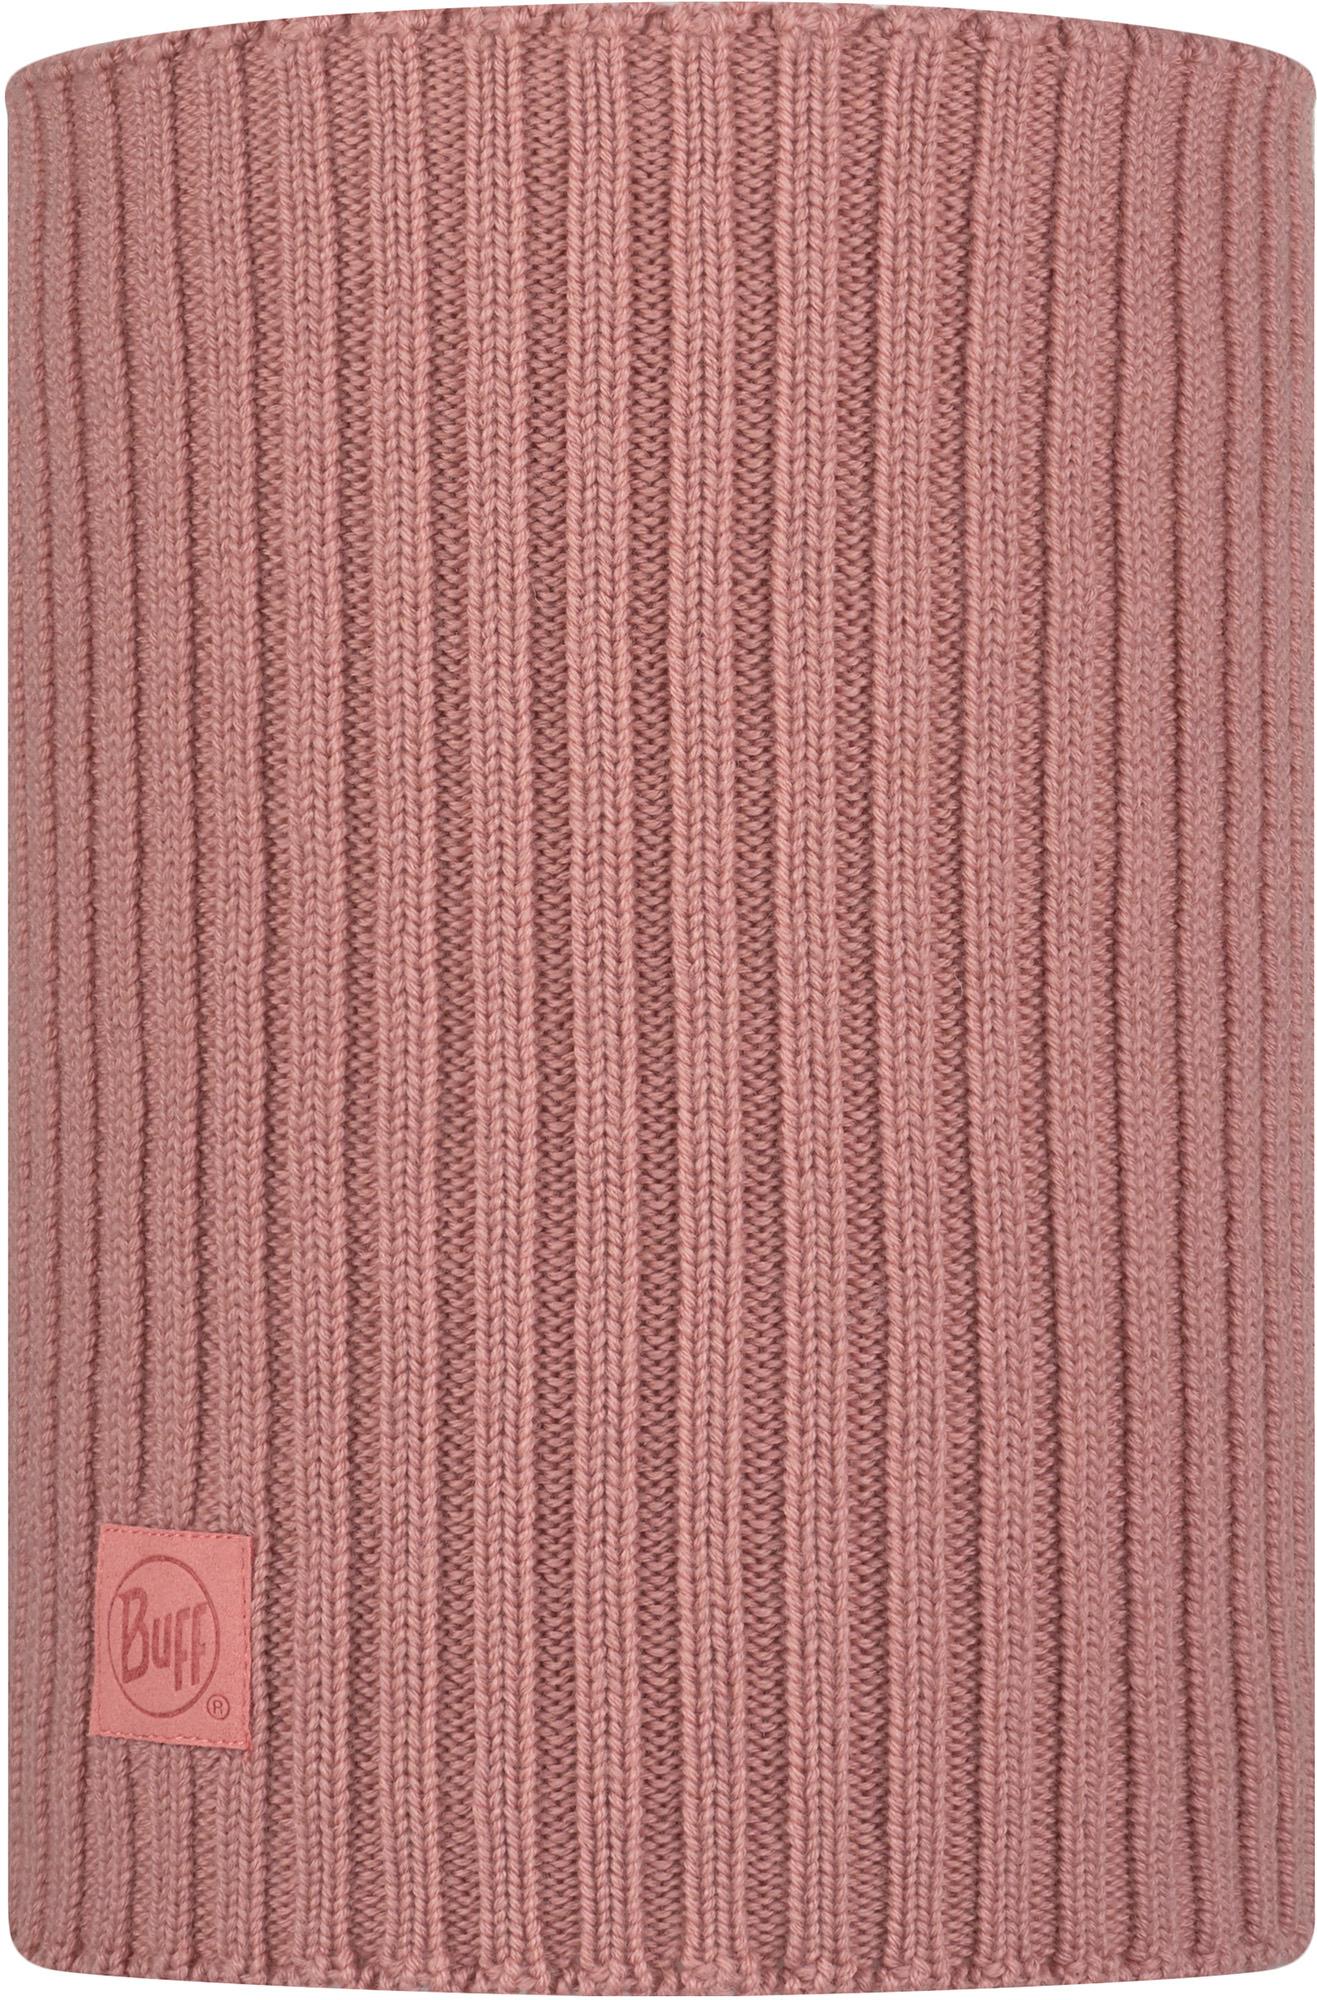 Image of BUFF Knitted Comfort Loop